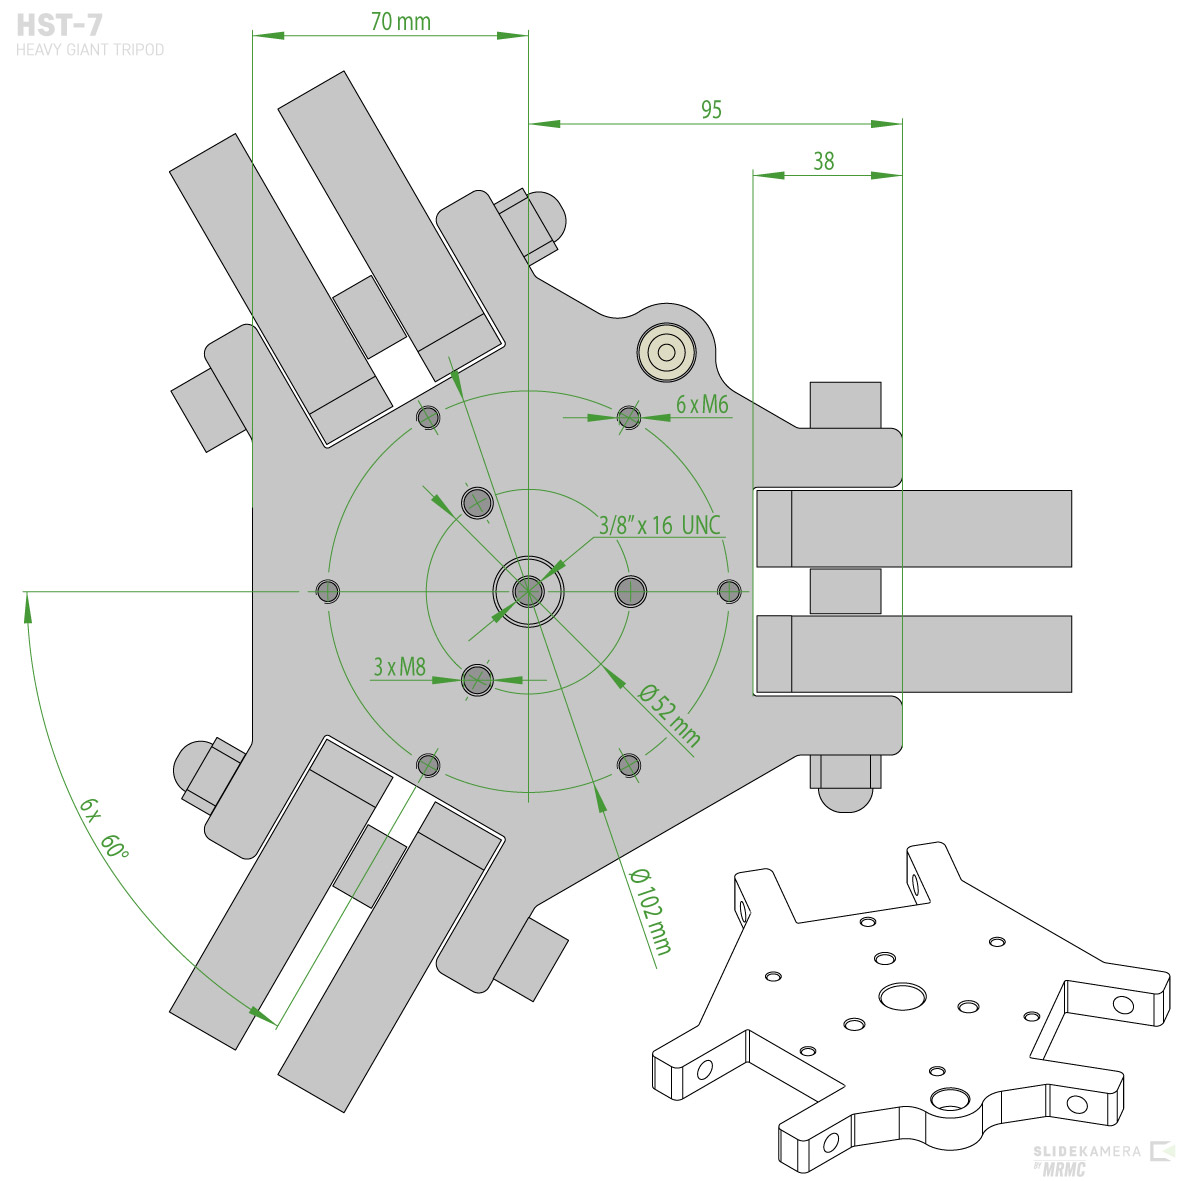 HST-7 - mounting plate dimensions